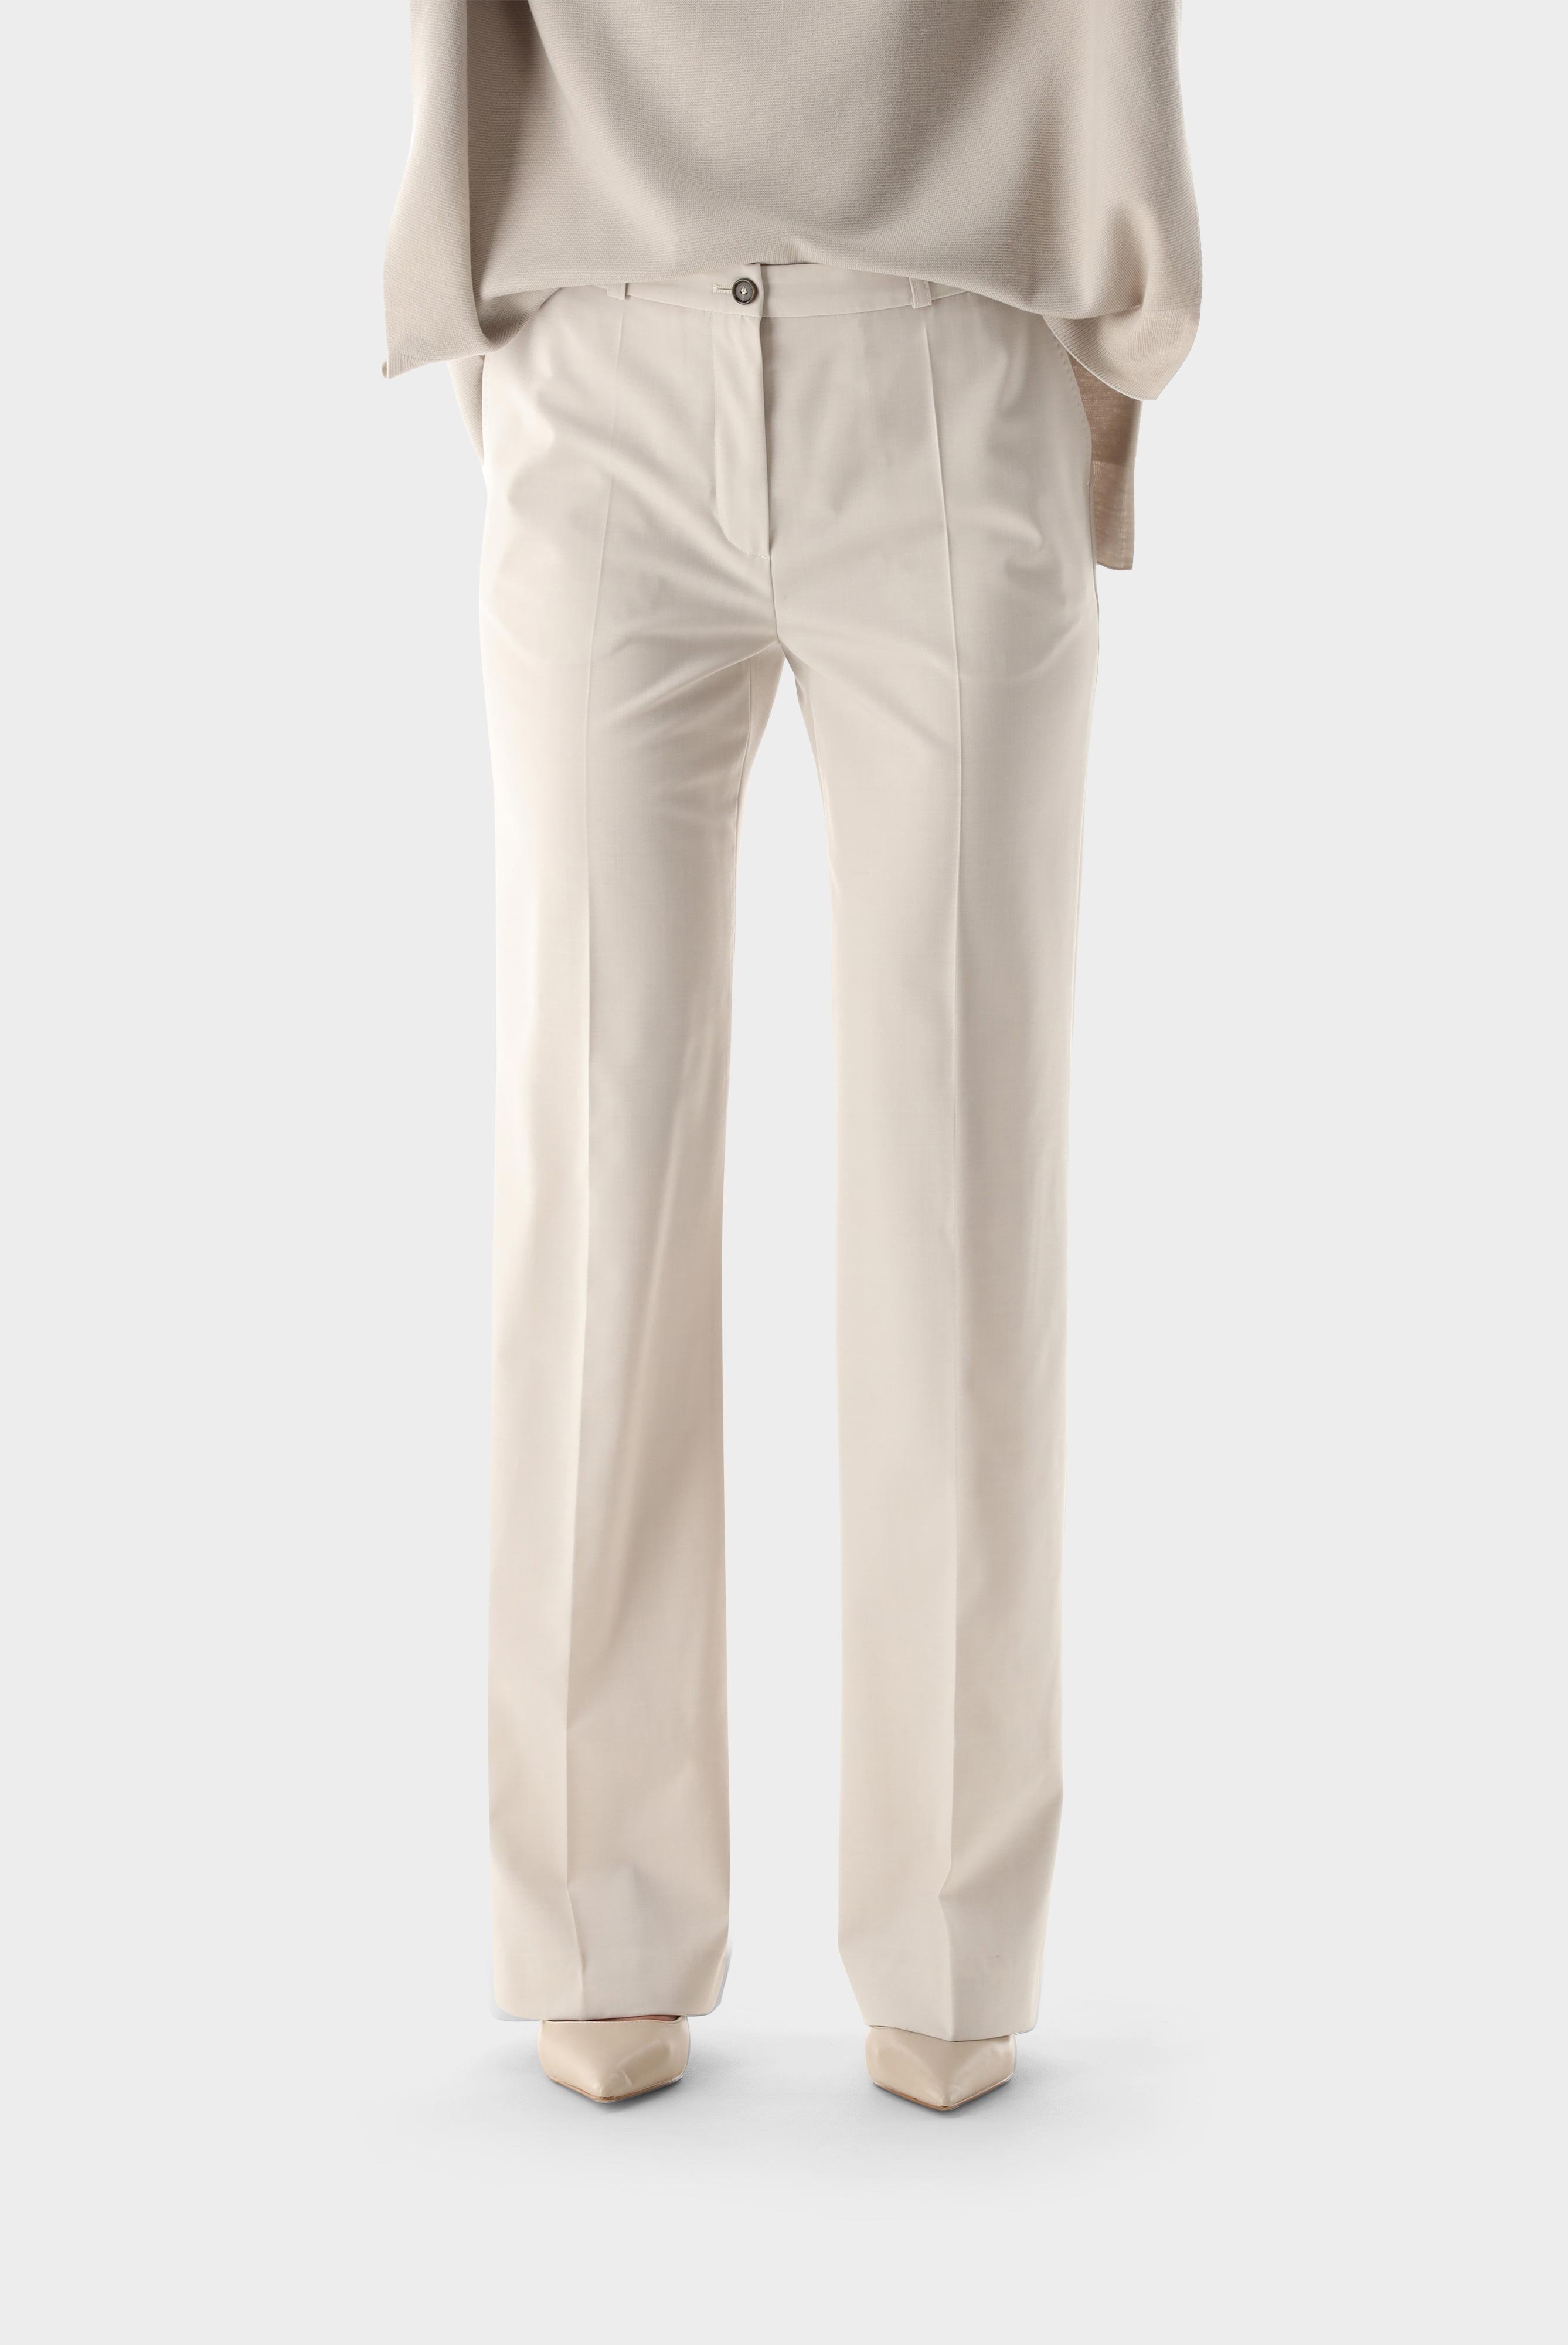 Jeans & Trousers+Pants with Straight-leg and Stretch+05.6354..H00162.010.36